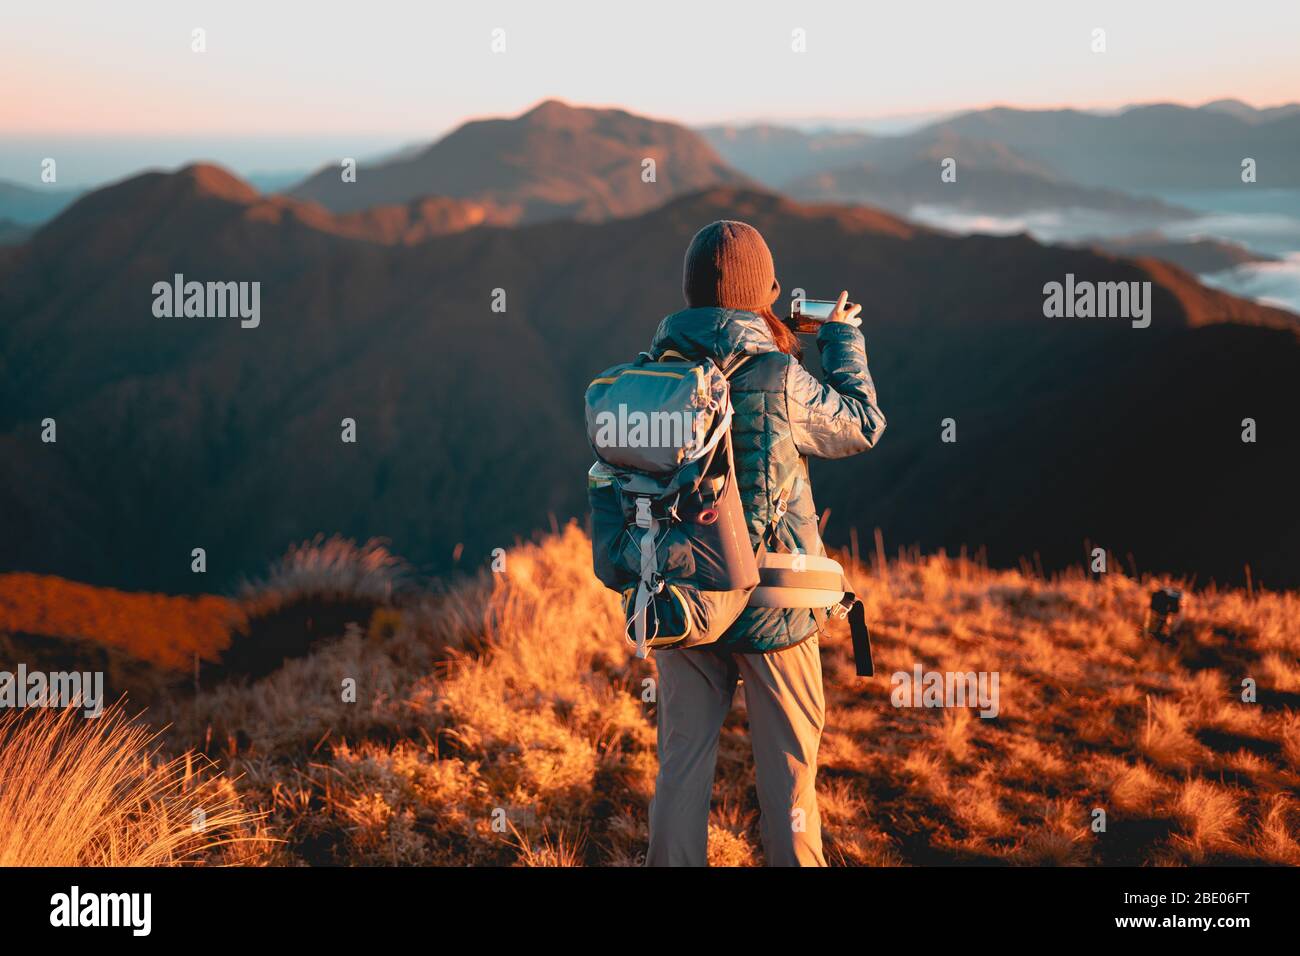 Adult female taking  photo using her mobile phone at sunrise at Mount Pulag National Park, Benguet, Philippines. Stock Photo